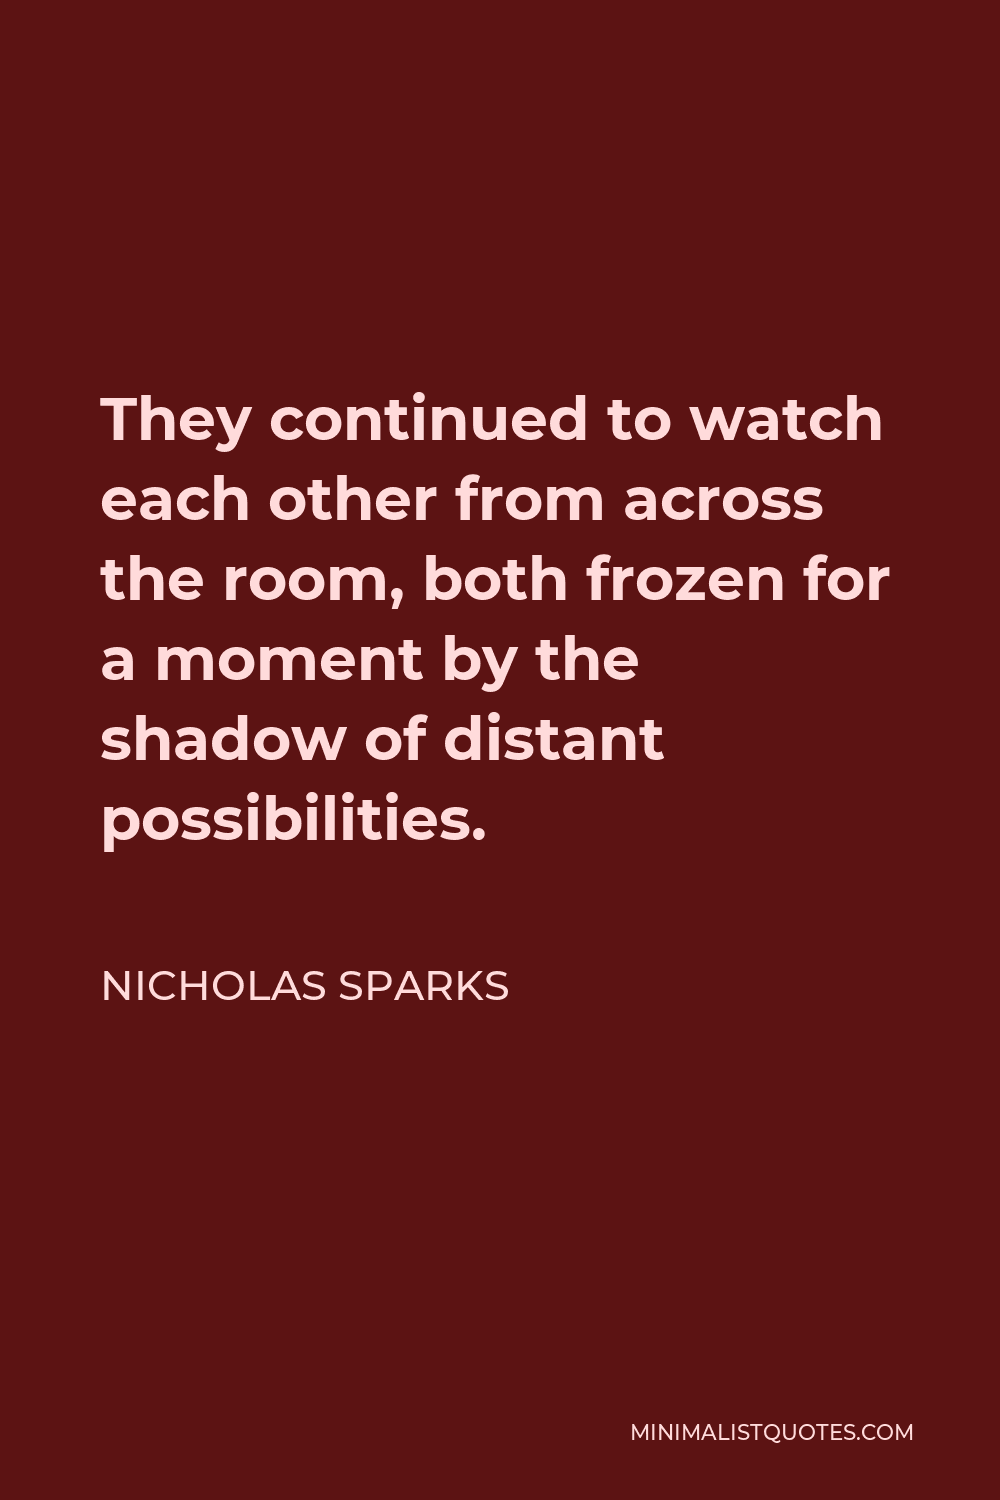 Nicholas Sparks Quote - They continued to watch each other from across the room, both frozen for a moment by the shadow of distant possibilities.